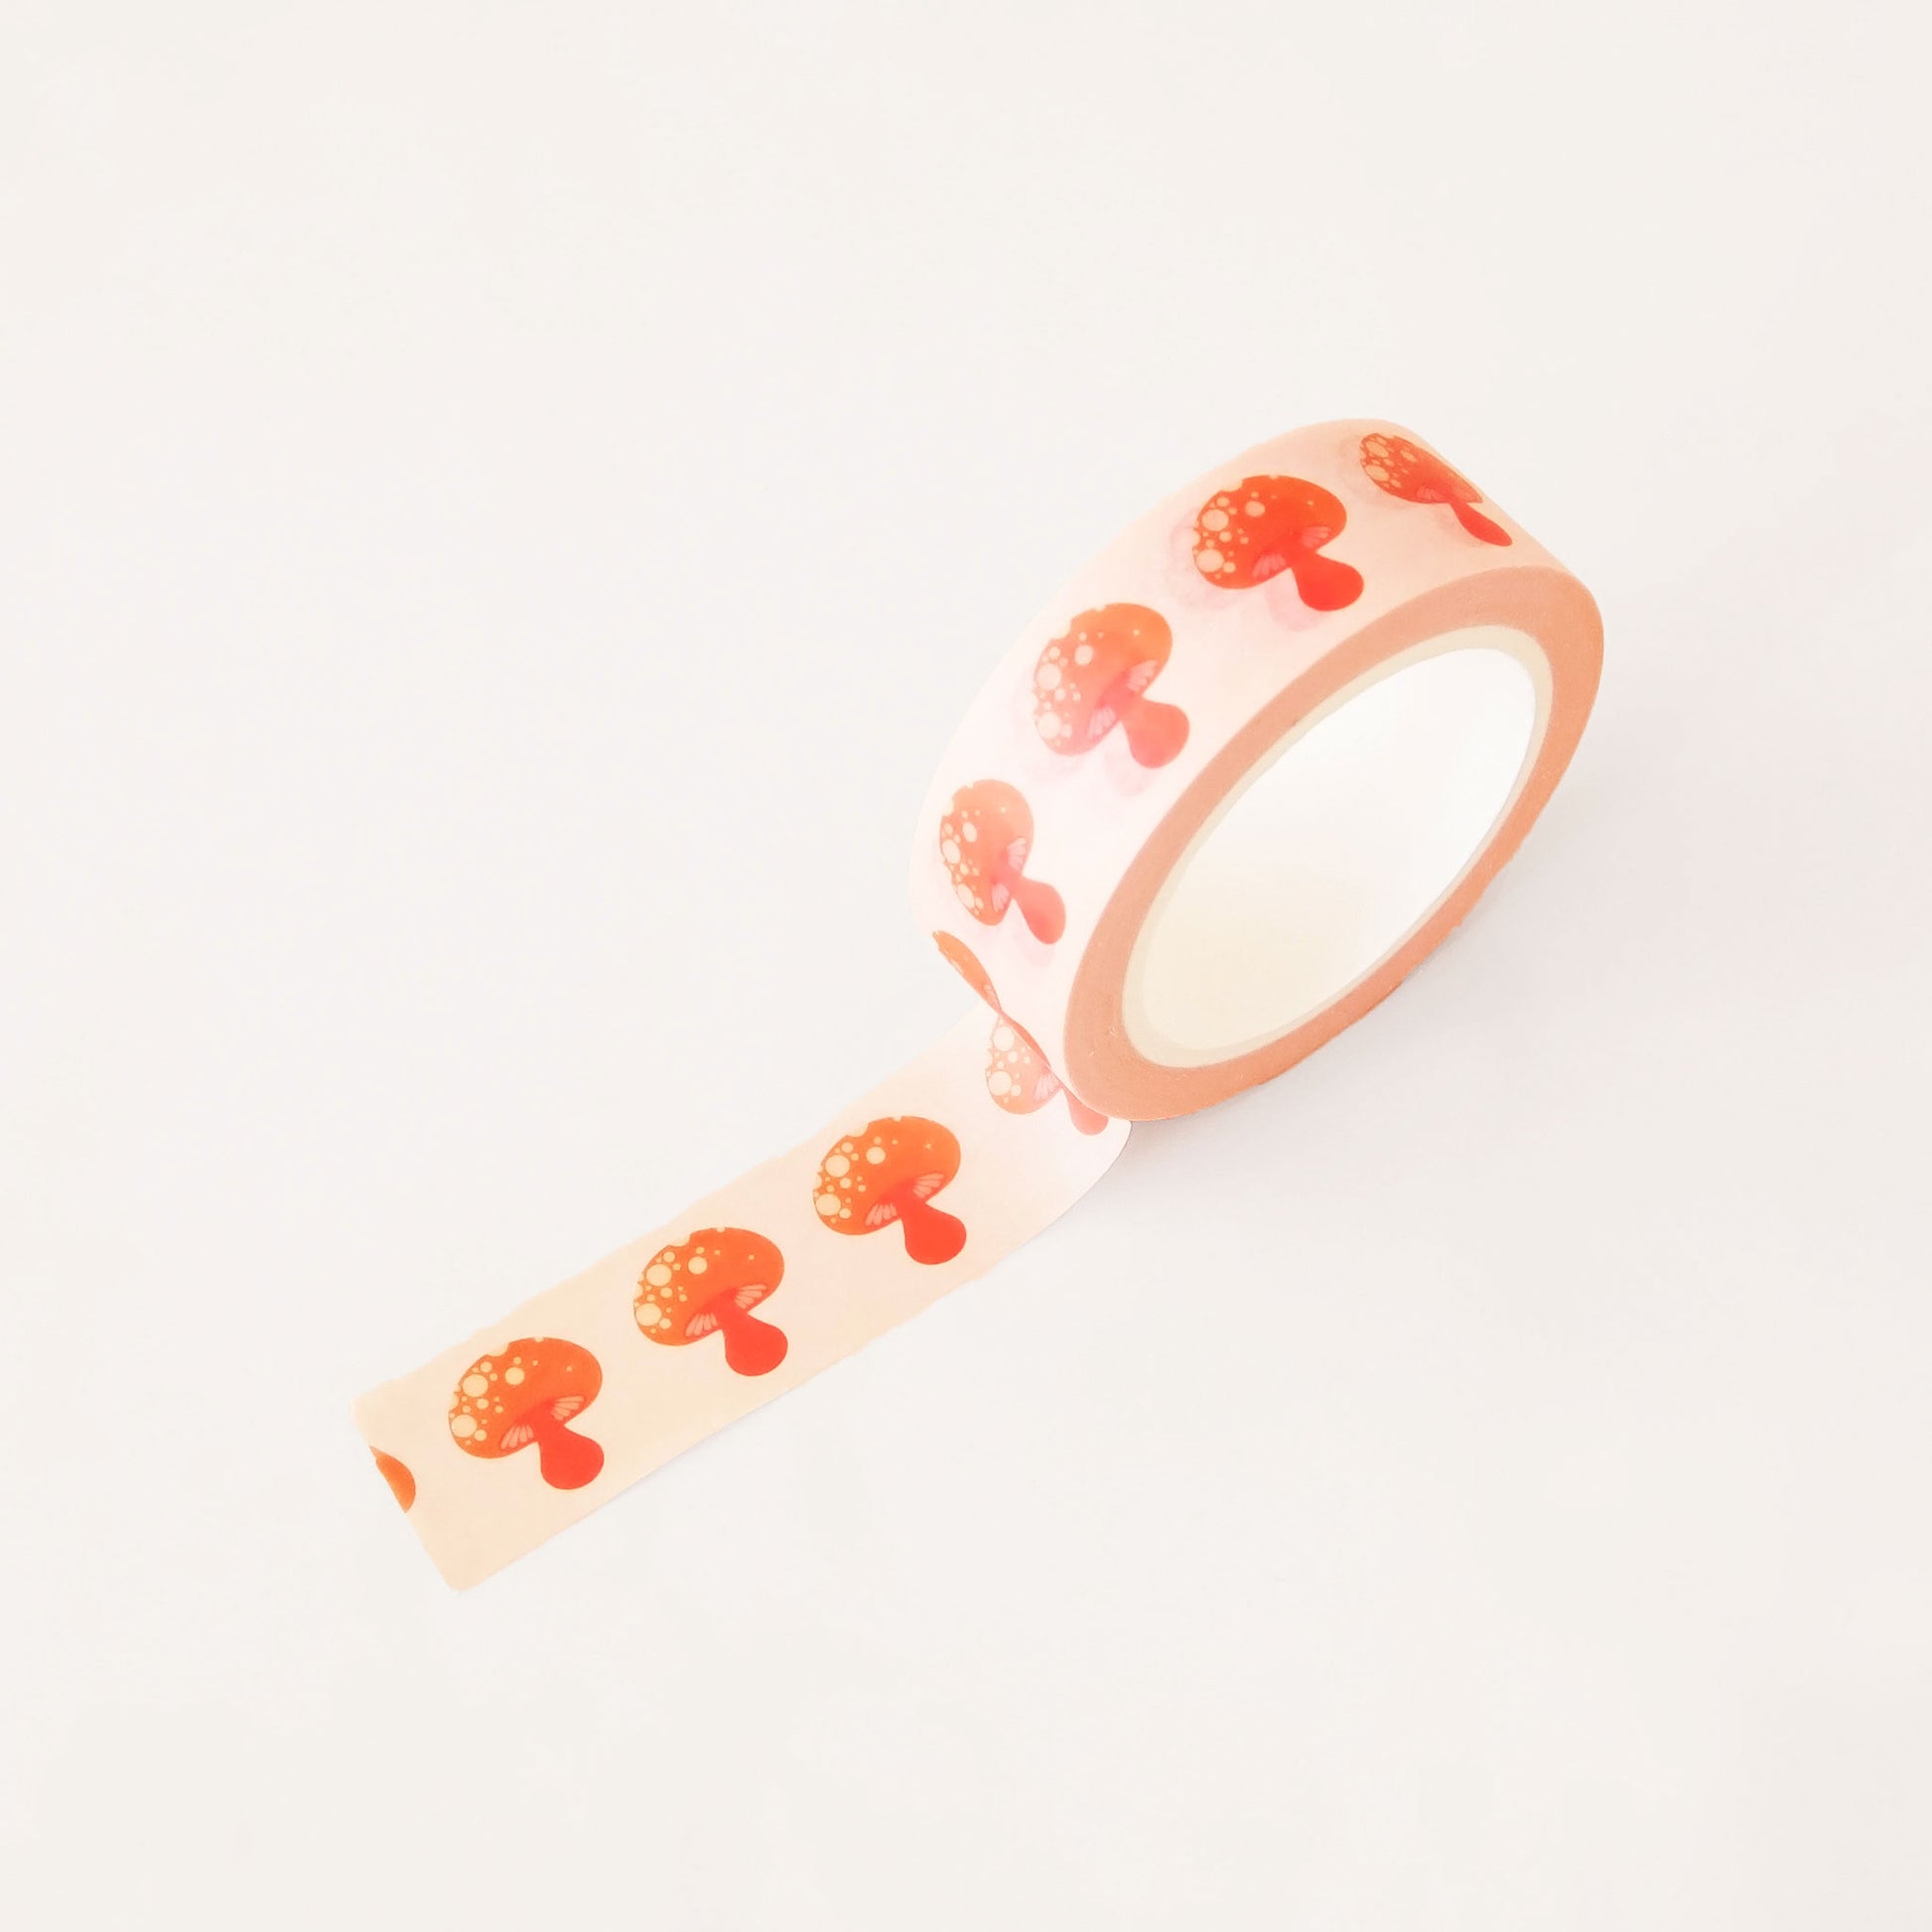 Roll of peach washi tape covered in red classic mushrooms. The roll is position upright, partially unrolled. 